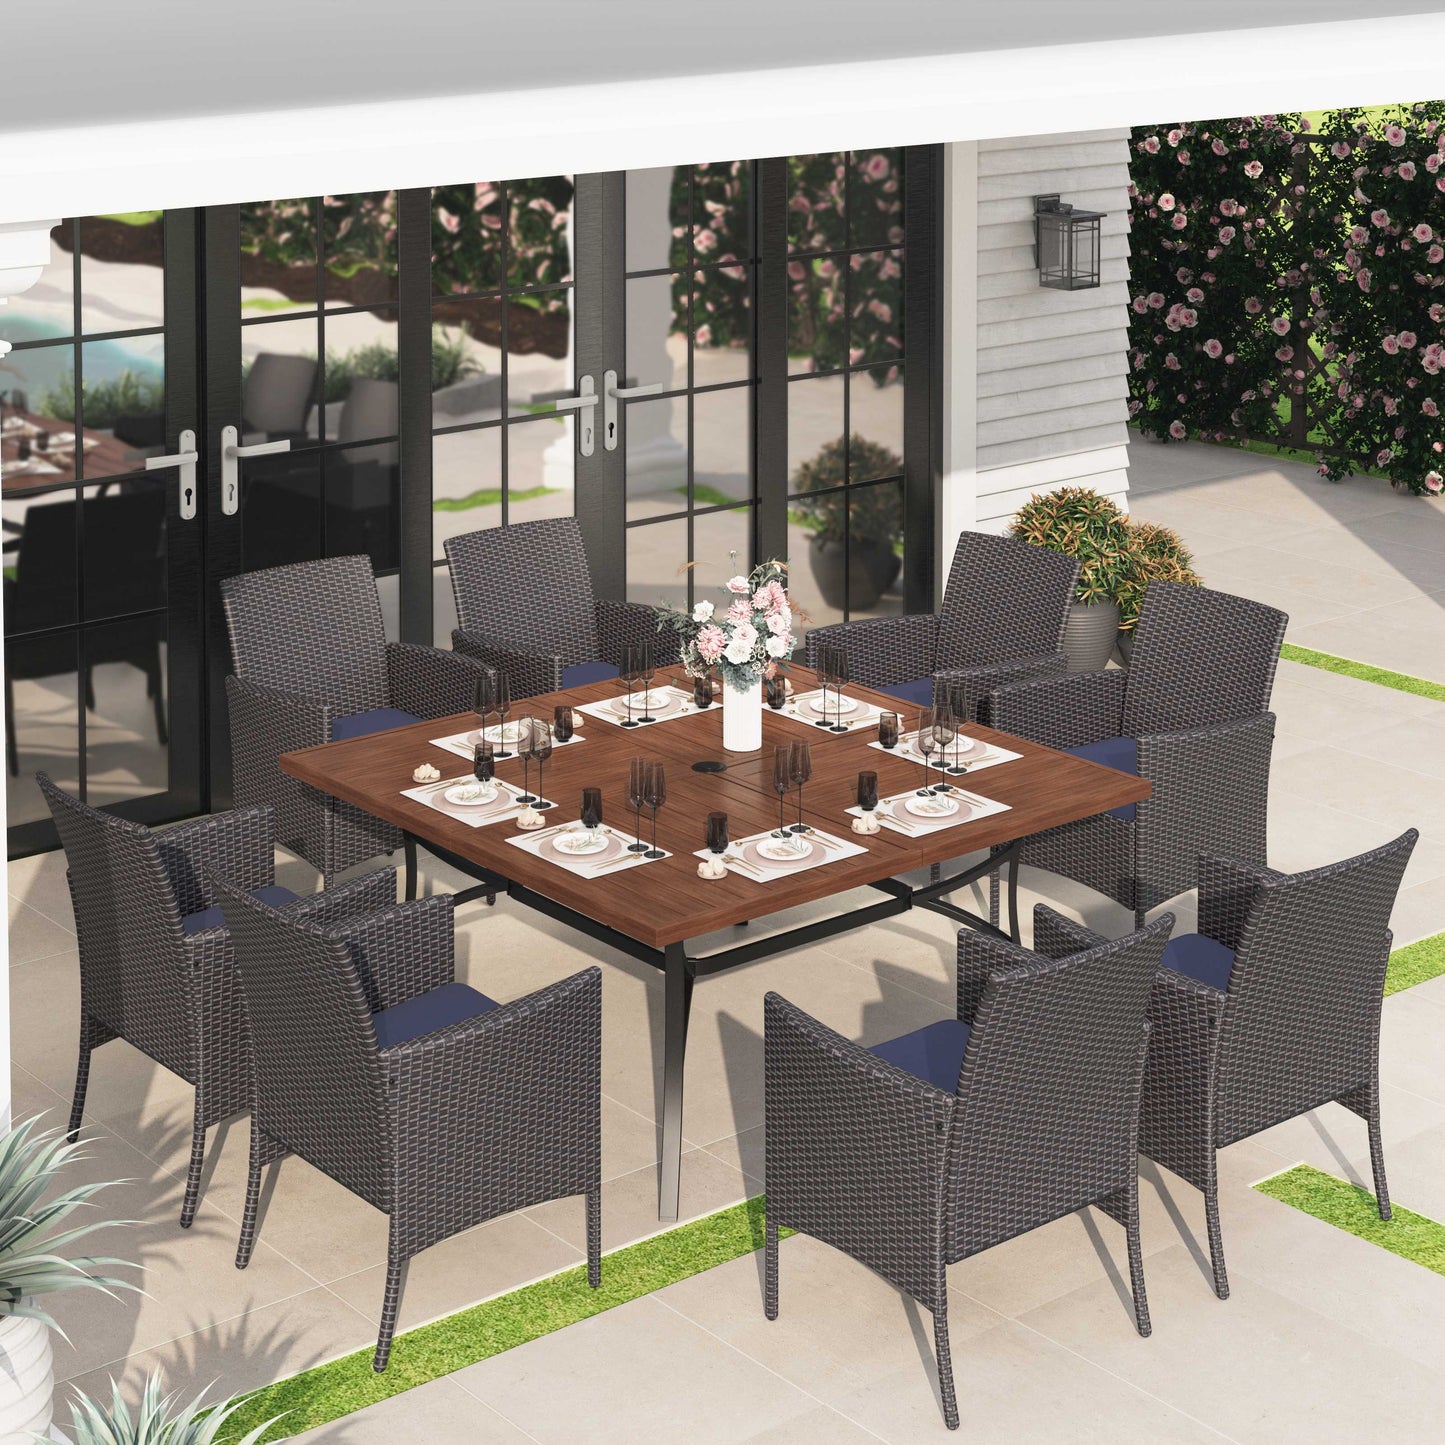 Sophia & William 9 Pieces Outdoor Patio Dining Set with 8Pcs Rattan Wicker Chairs & 1Pc Large Square Metal Table